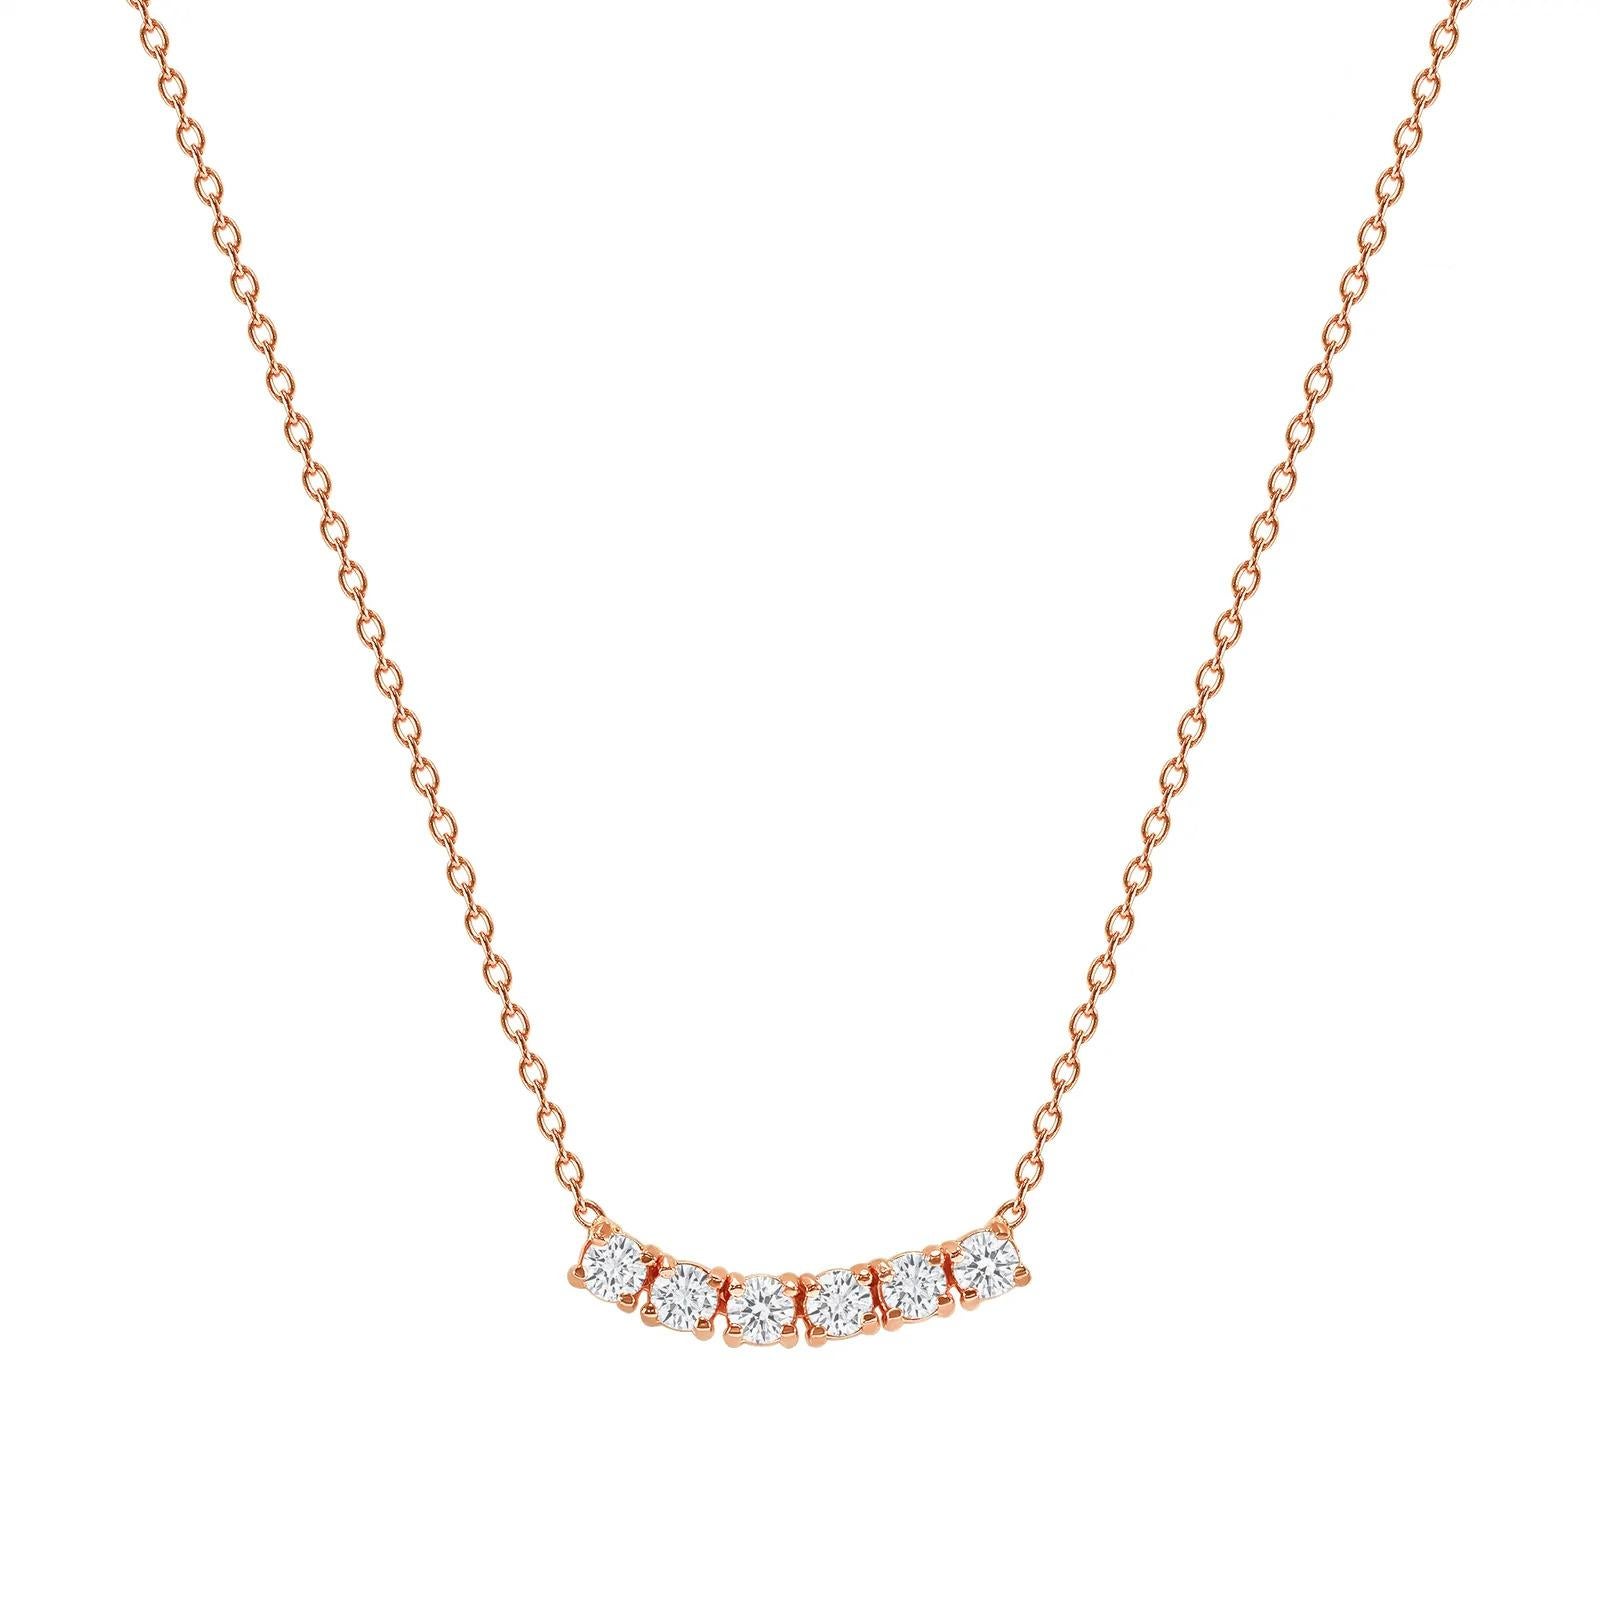 This petite, curved diamond necklace is crafted with gorgeous 14k gold set with six round diamonds.  

Gold: 14k 
Diamond Total Carats: 0.75 ct
Diamond Cut: Round (6 diamonds)
Diamond Clarity: VS
Diamond Color: F
Color: Rose Gold
Necklace Length: 16